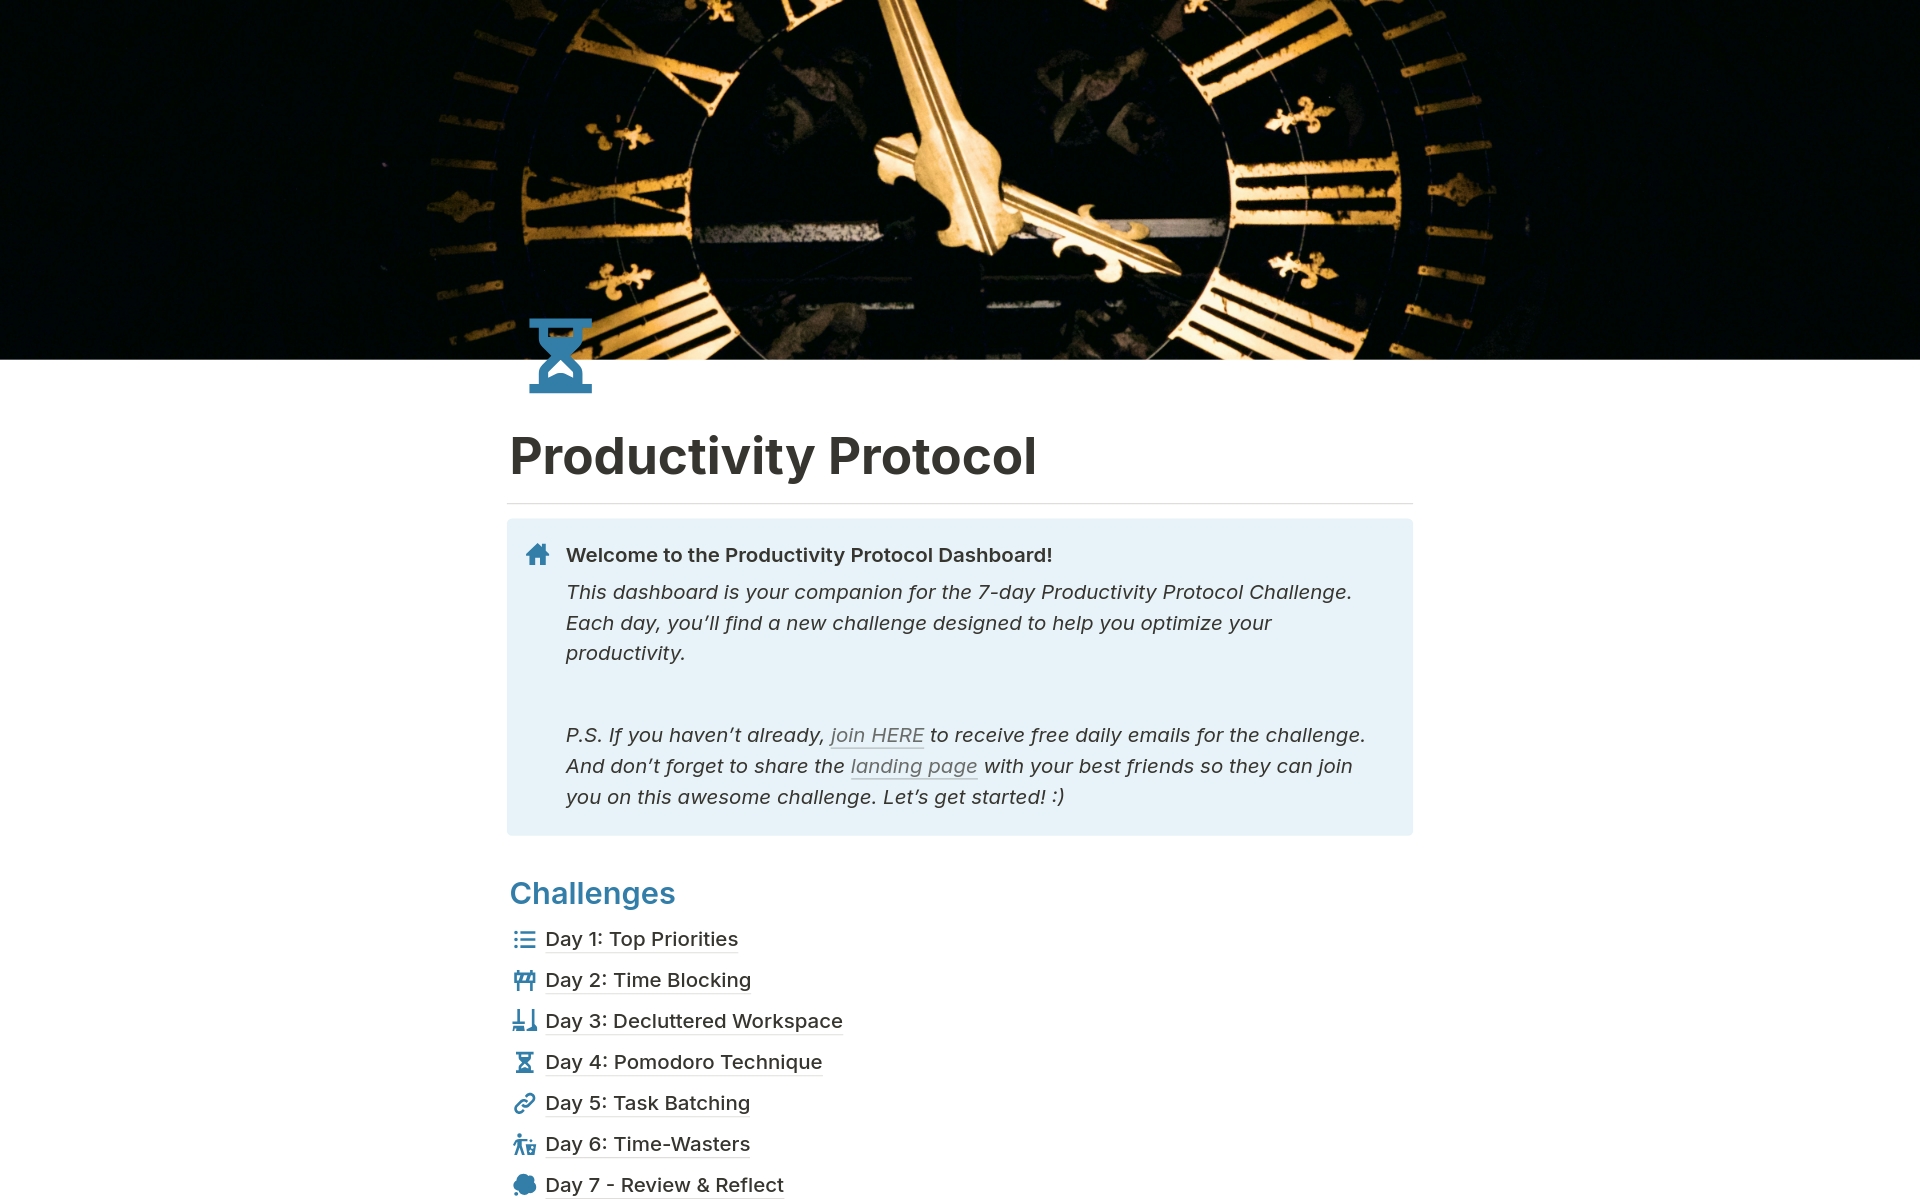 Boost your productivity with a free 7-day challenge. Each day, tackle new actions like time blocking, decluttering, and the Pomodoro Technique. Focus on top priorities, eliminate time-wasters, and reflect on your progress. Join now and transform your productivity!